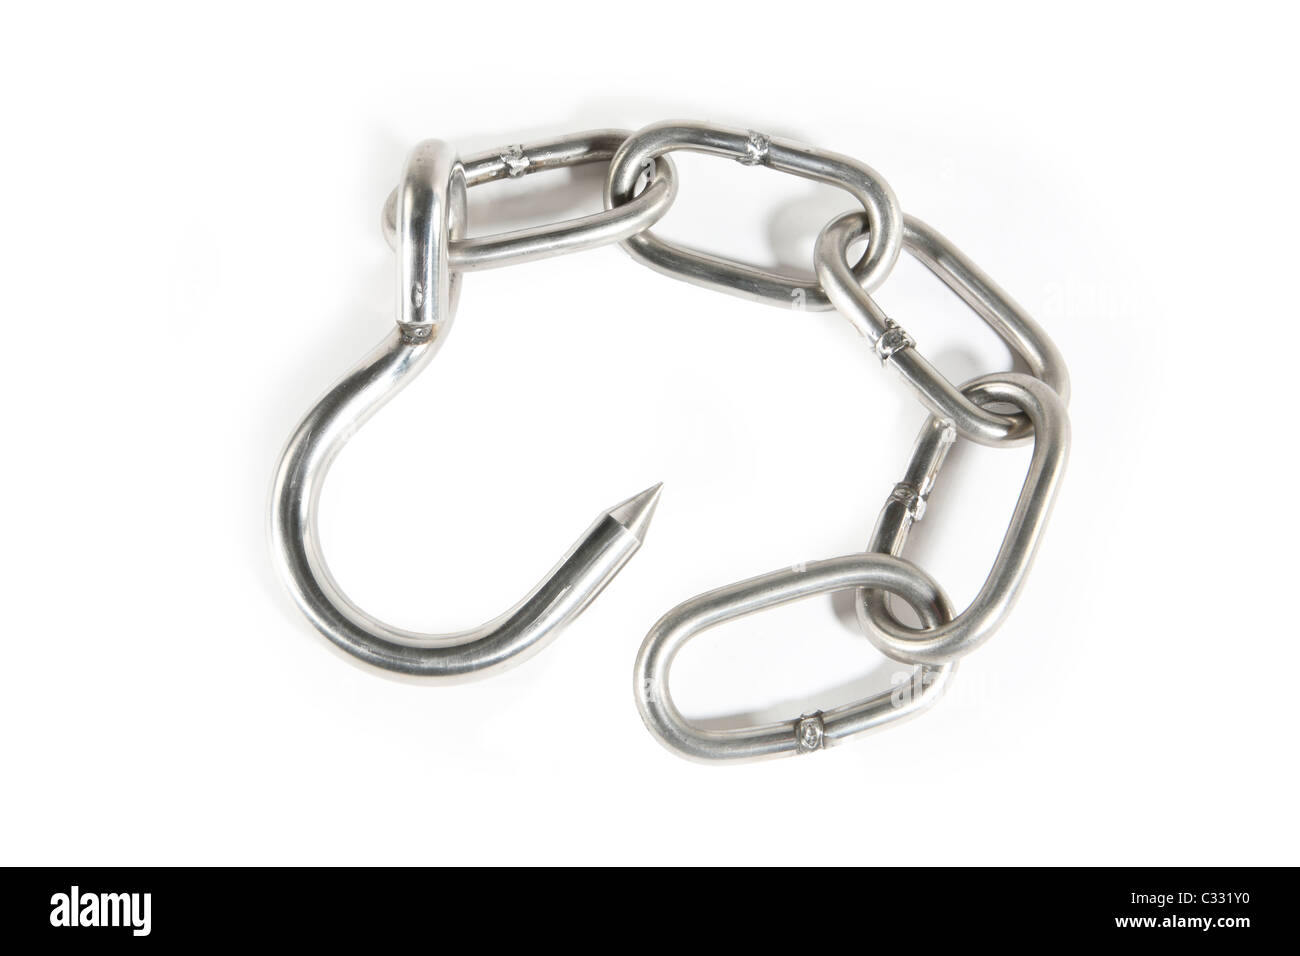 Metal heavy chain and hook Stock Photo